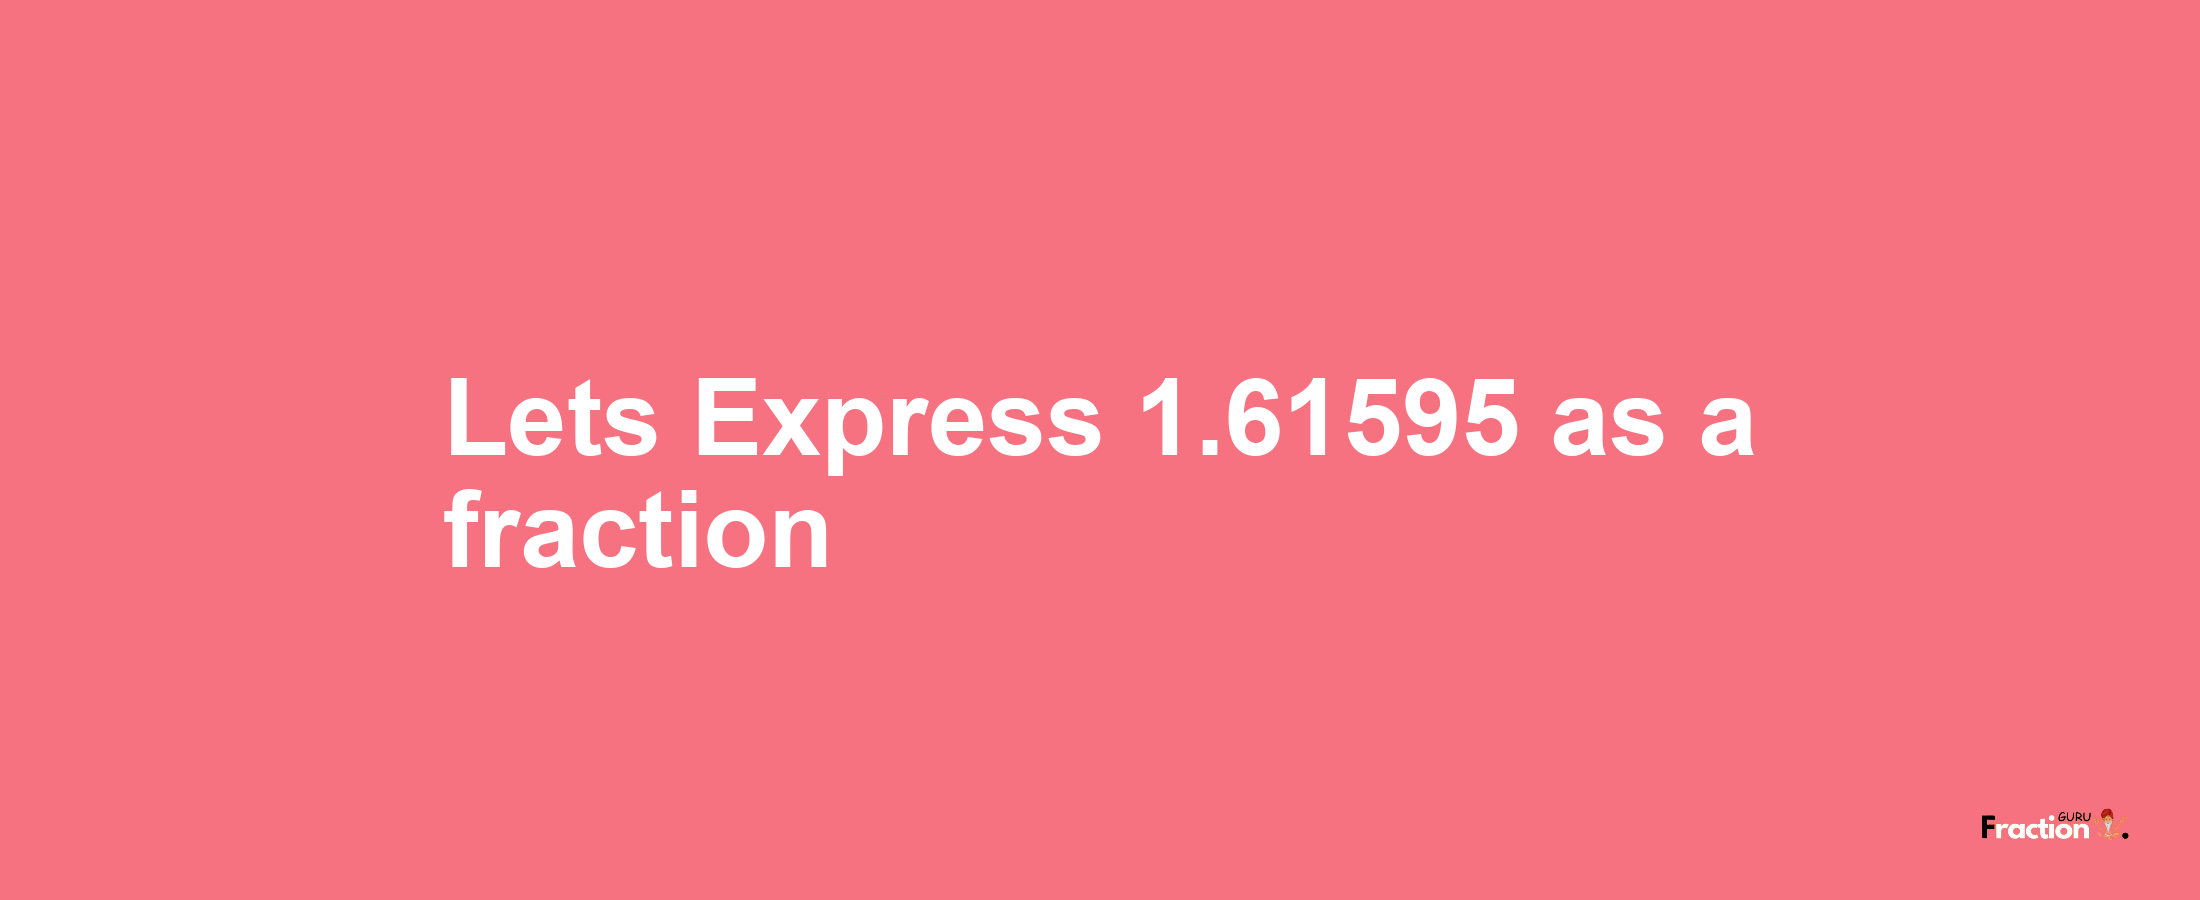 Lets Express 1.61595 as afraction